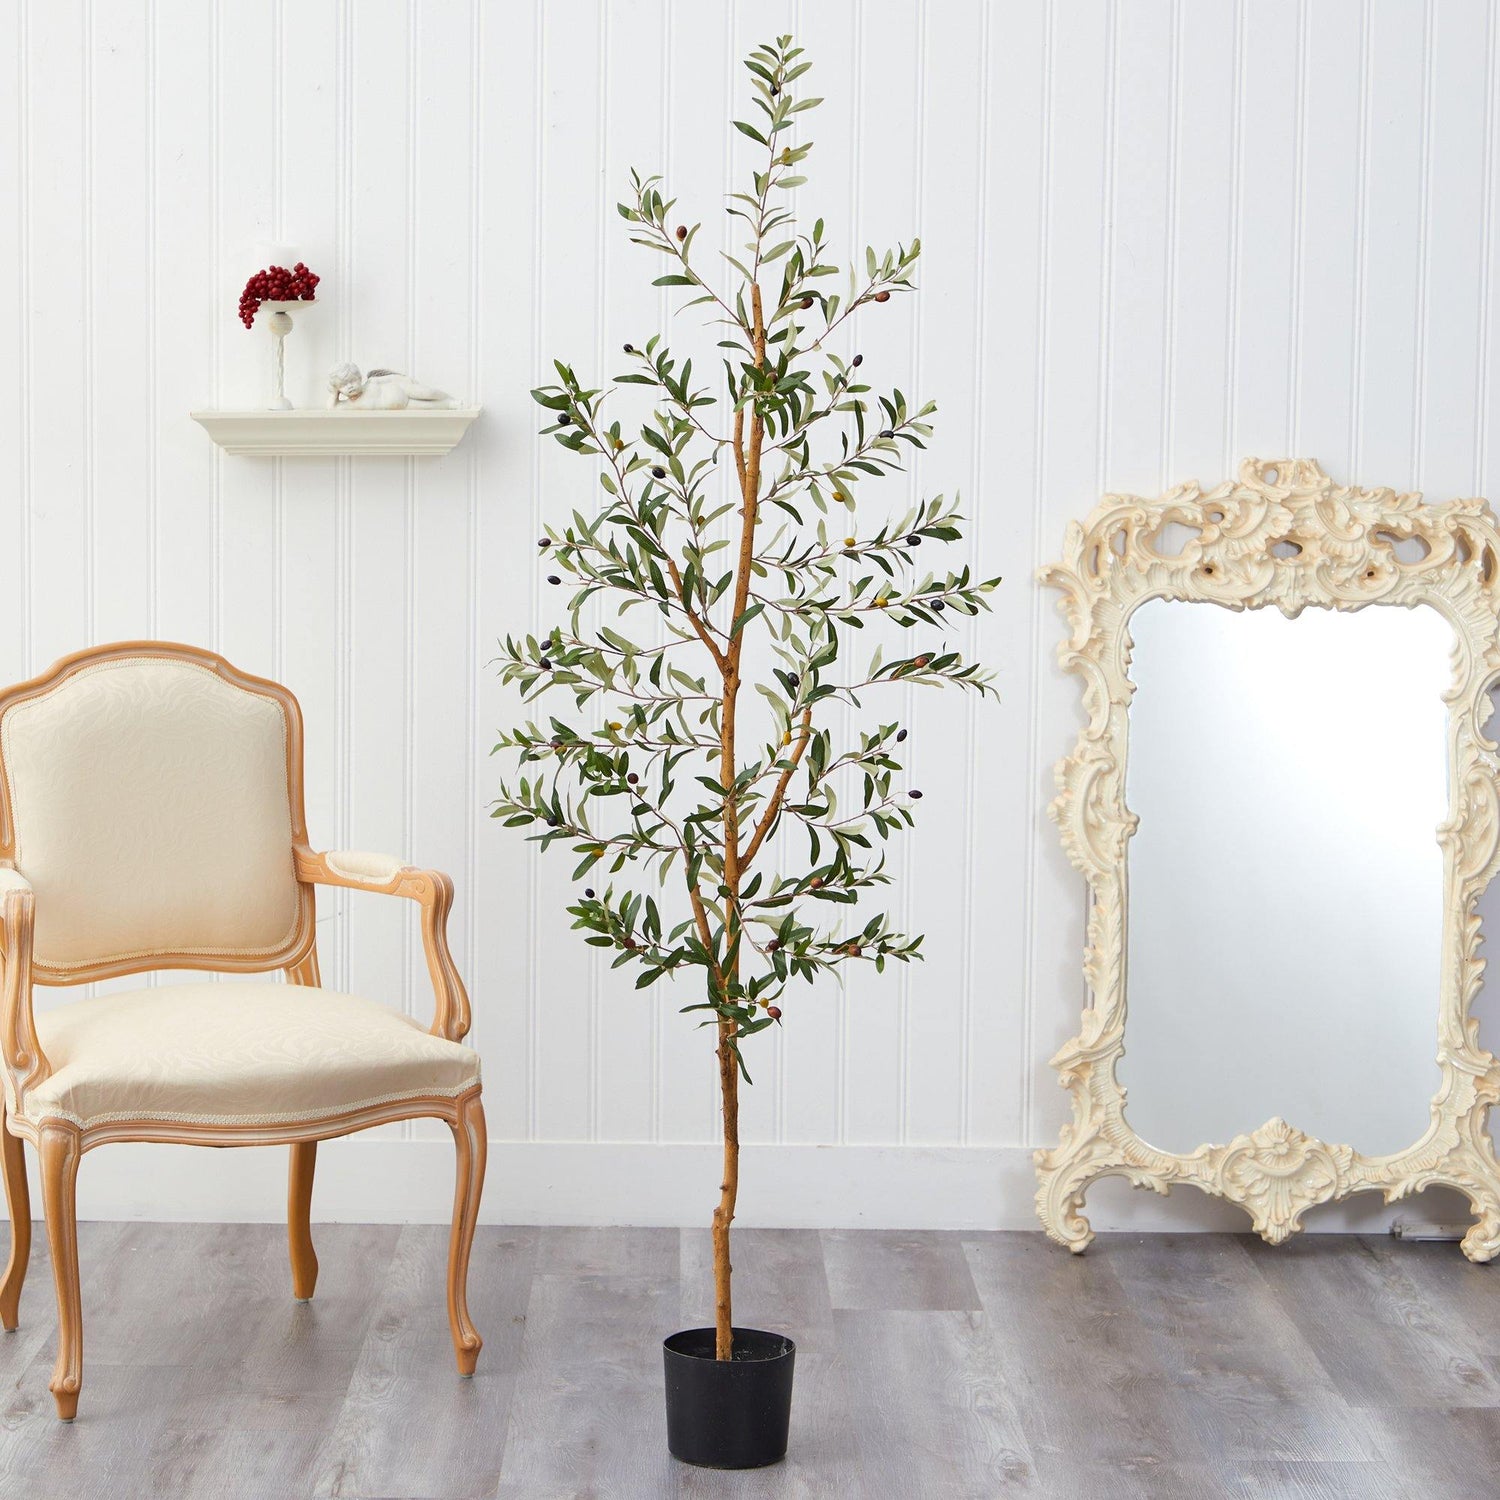 5.5’ Olive Artificial Tree